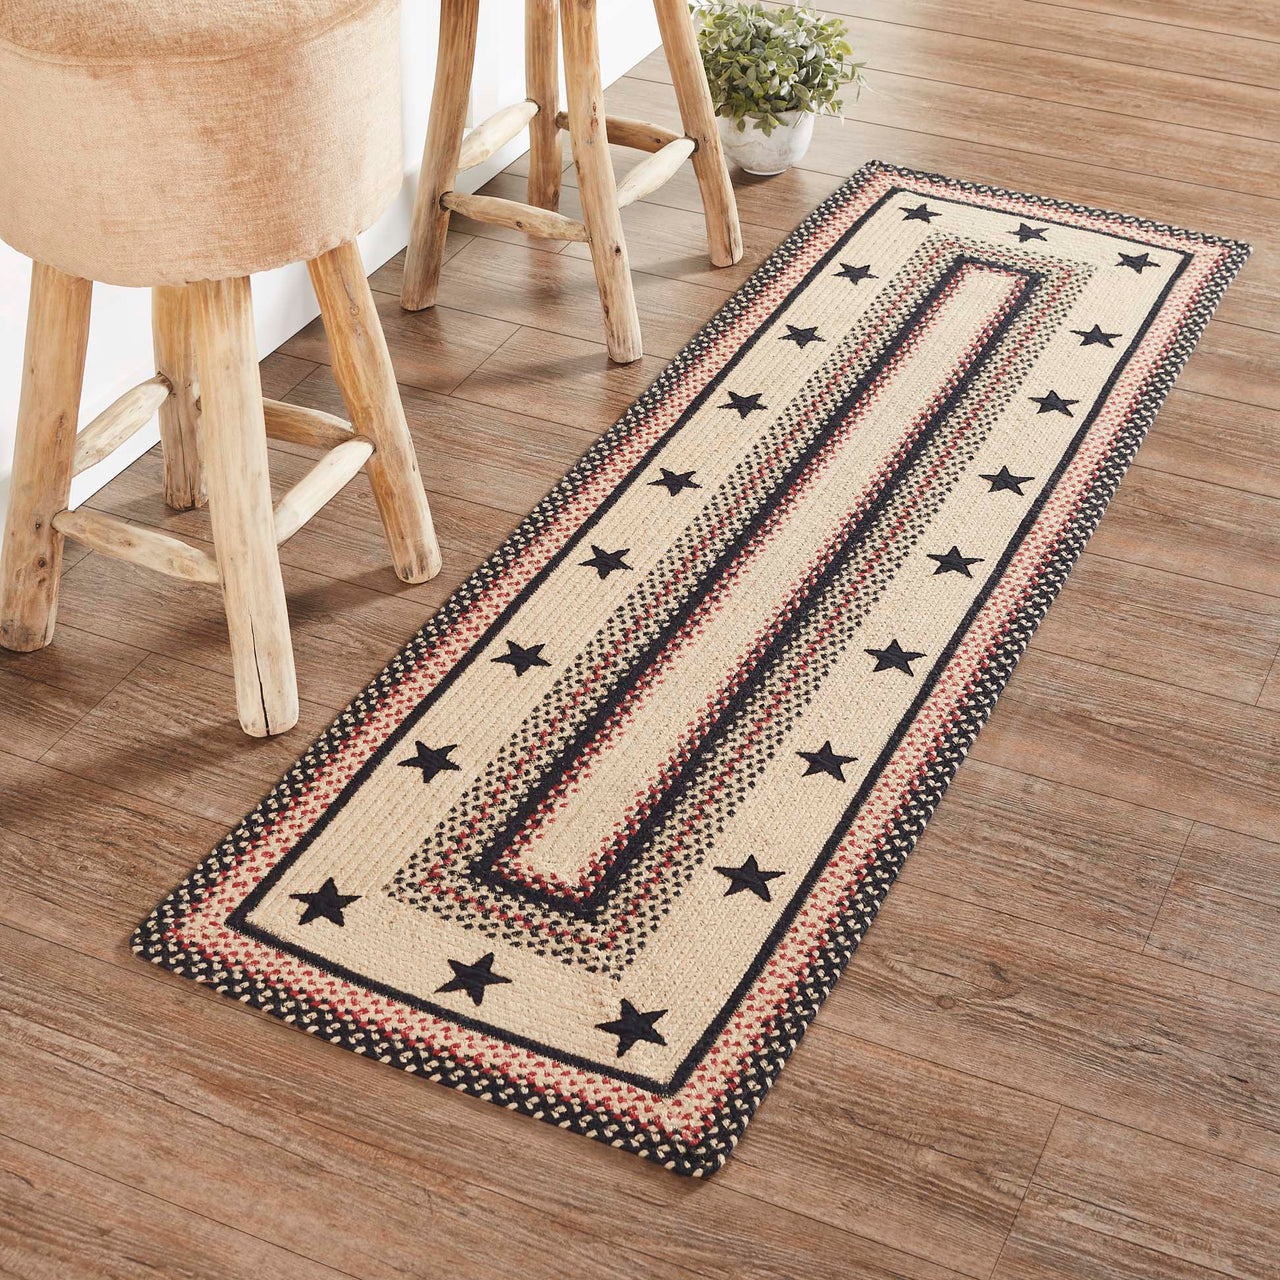 Colonial Star Jute Braided Rug/Runner Rect with Rug Pad 22"x72" VHC Brands